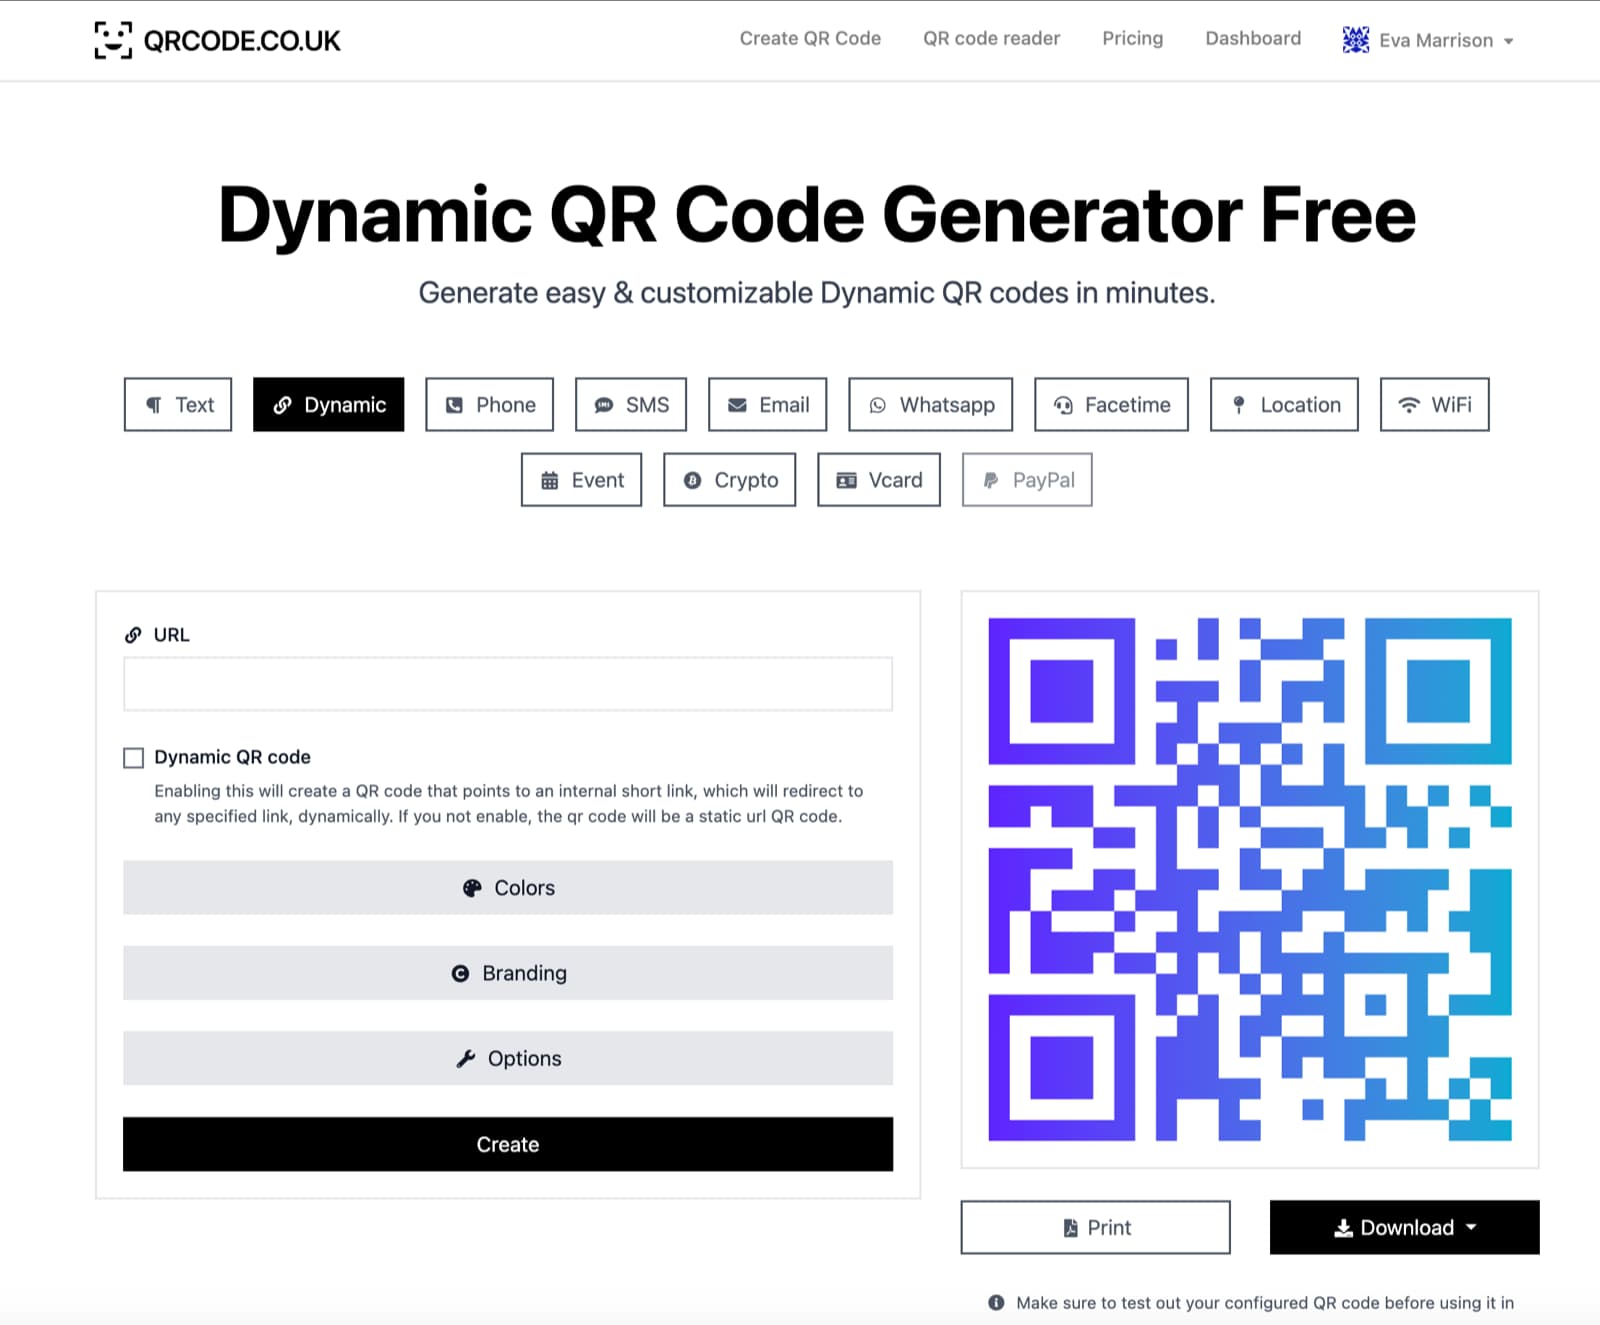 creating dynamic qr code with qrcodeco.uk